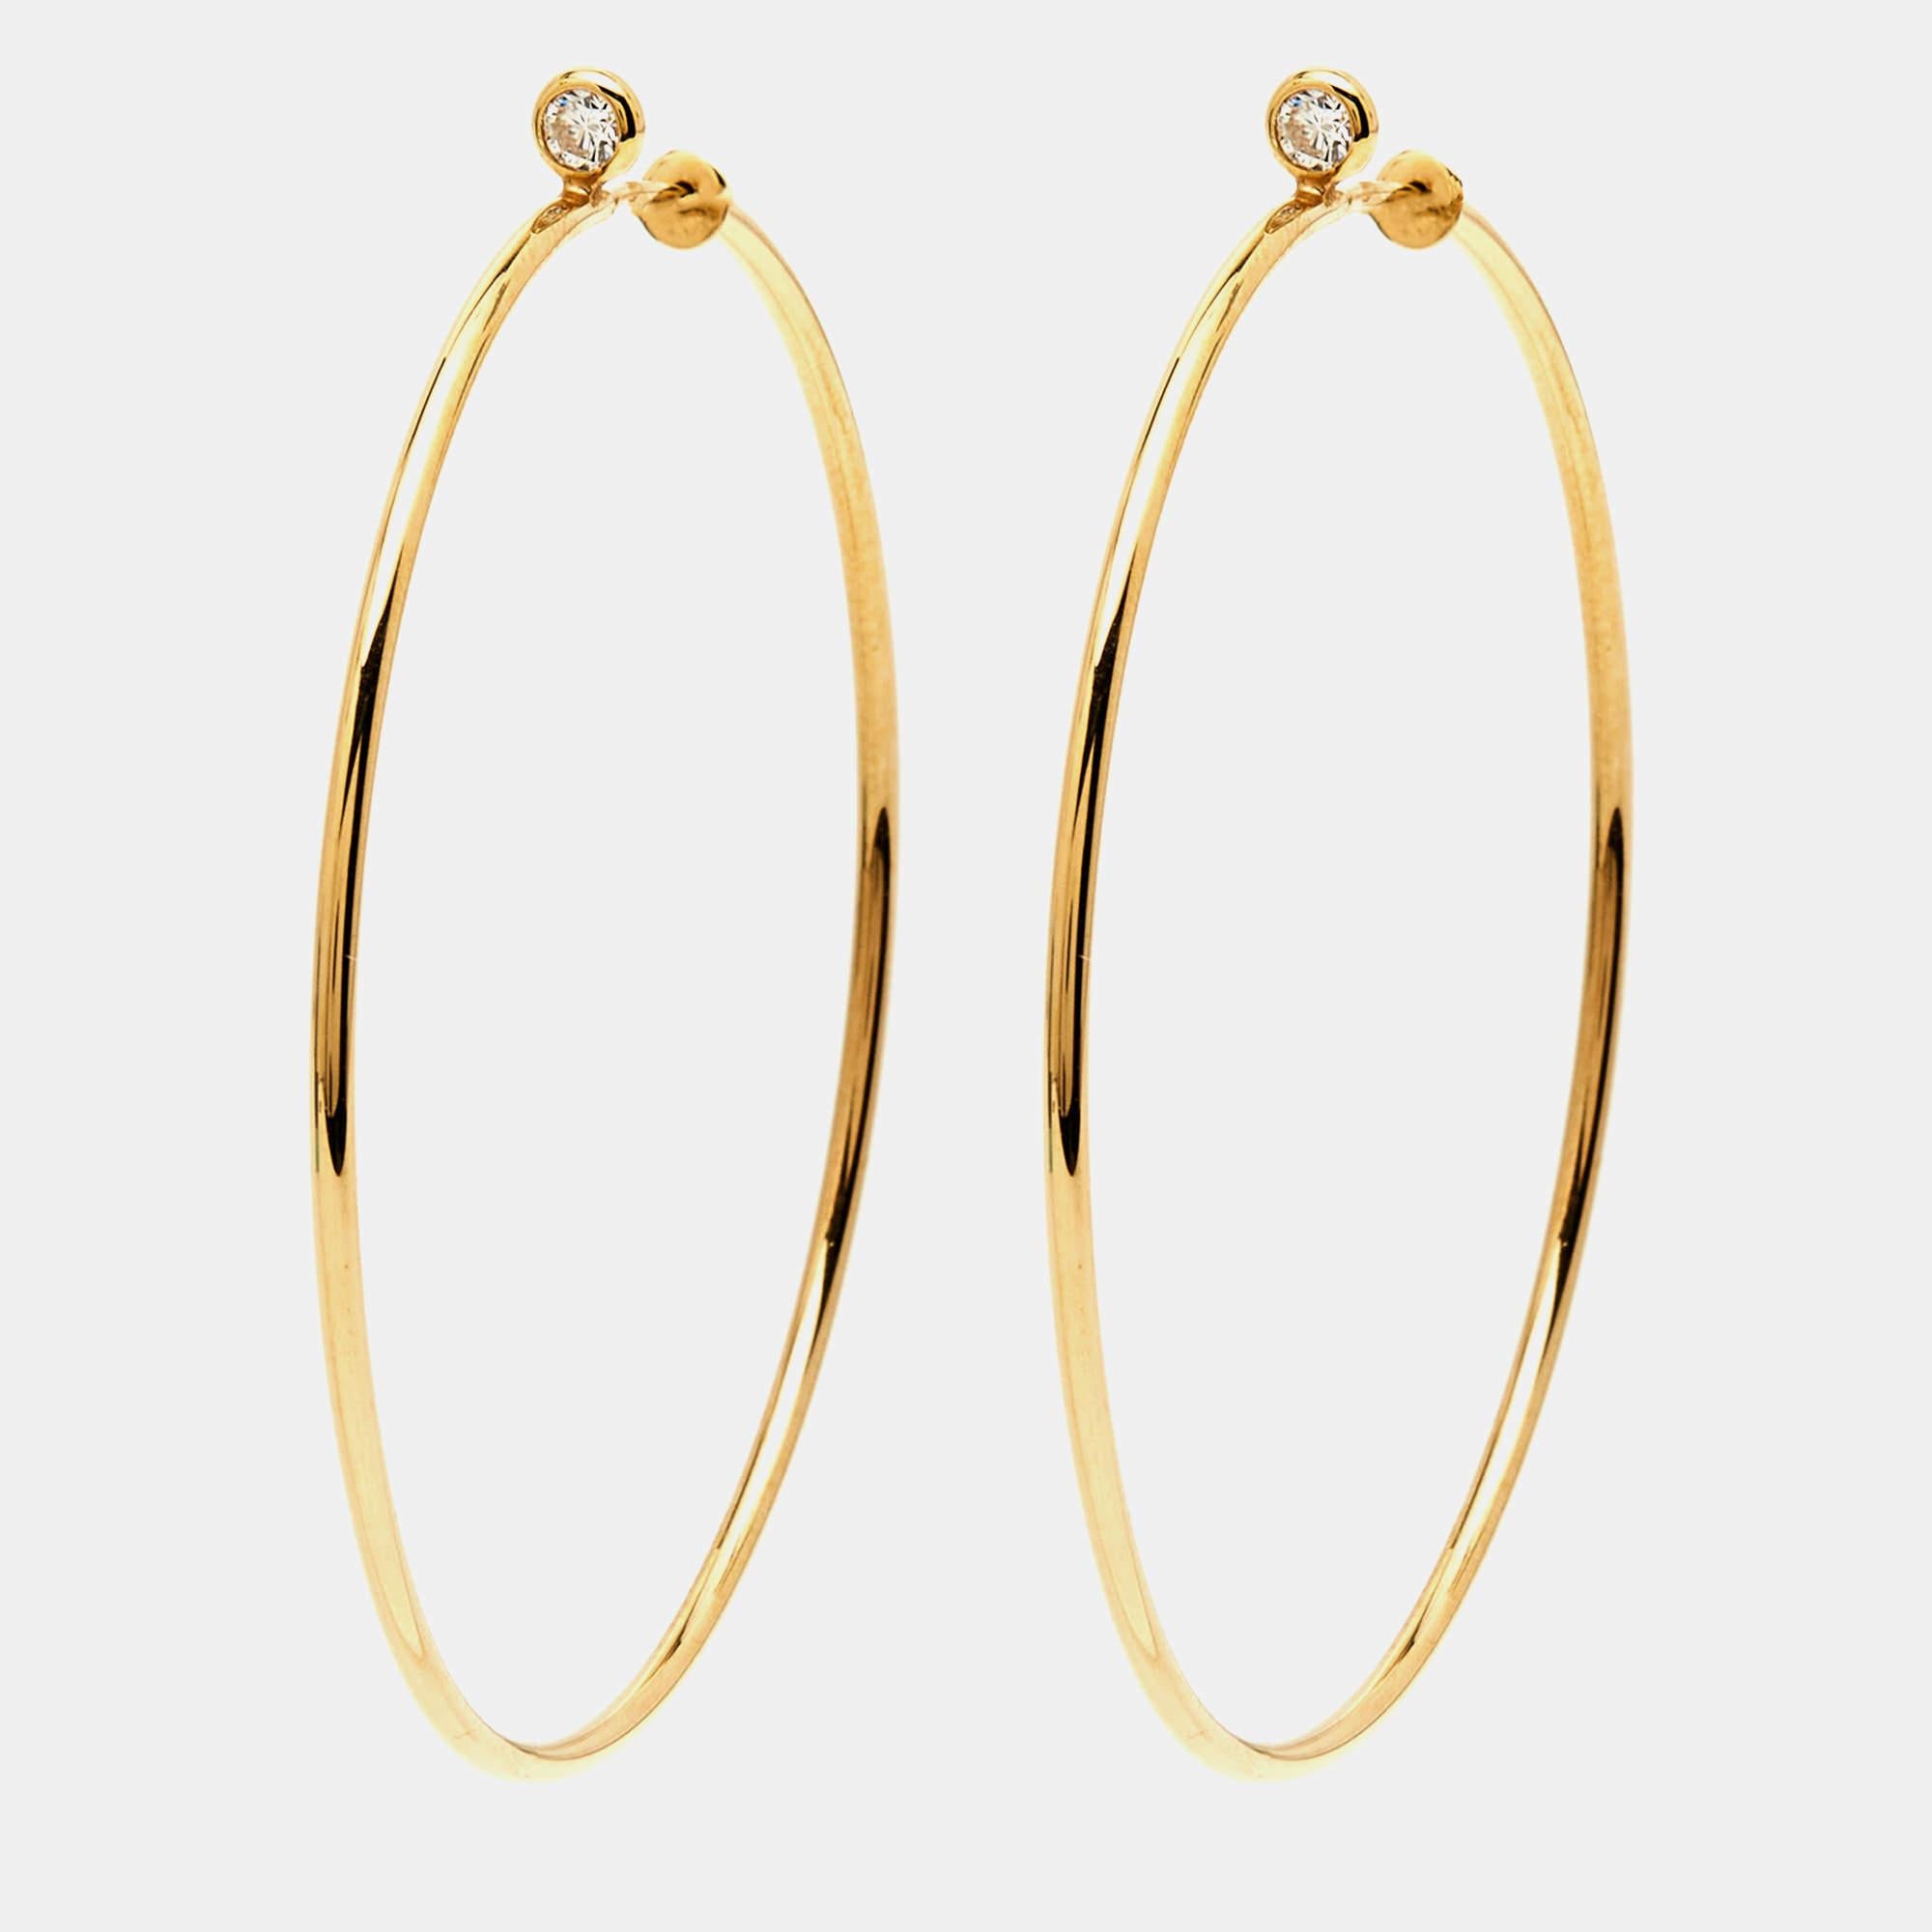 Discover elegance with Tiffany & Co.'s Elsa Peretti hoop earrings. Crafted from 18k yellow gold, these hoops exude timeless beauty. Each earring features delicate diamonds, adding a touch of sparkle to any ensemble. Elevate your style with these